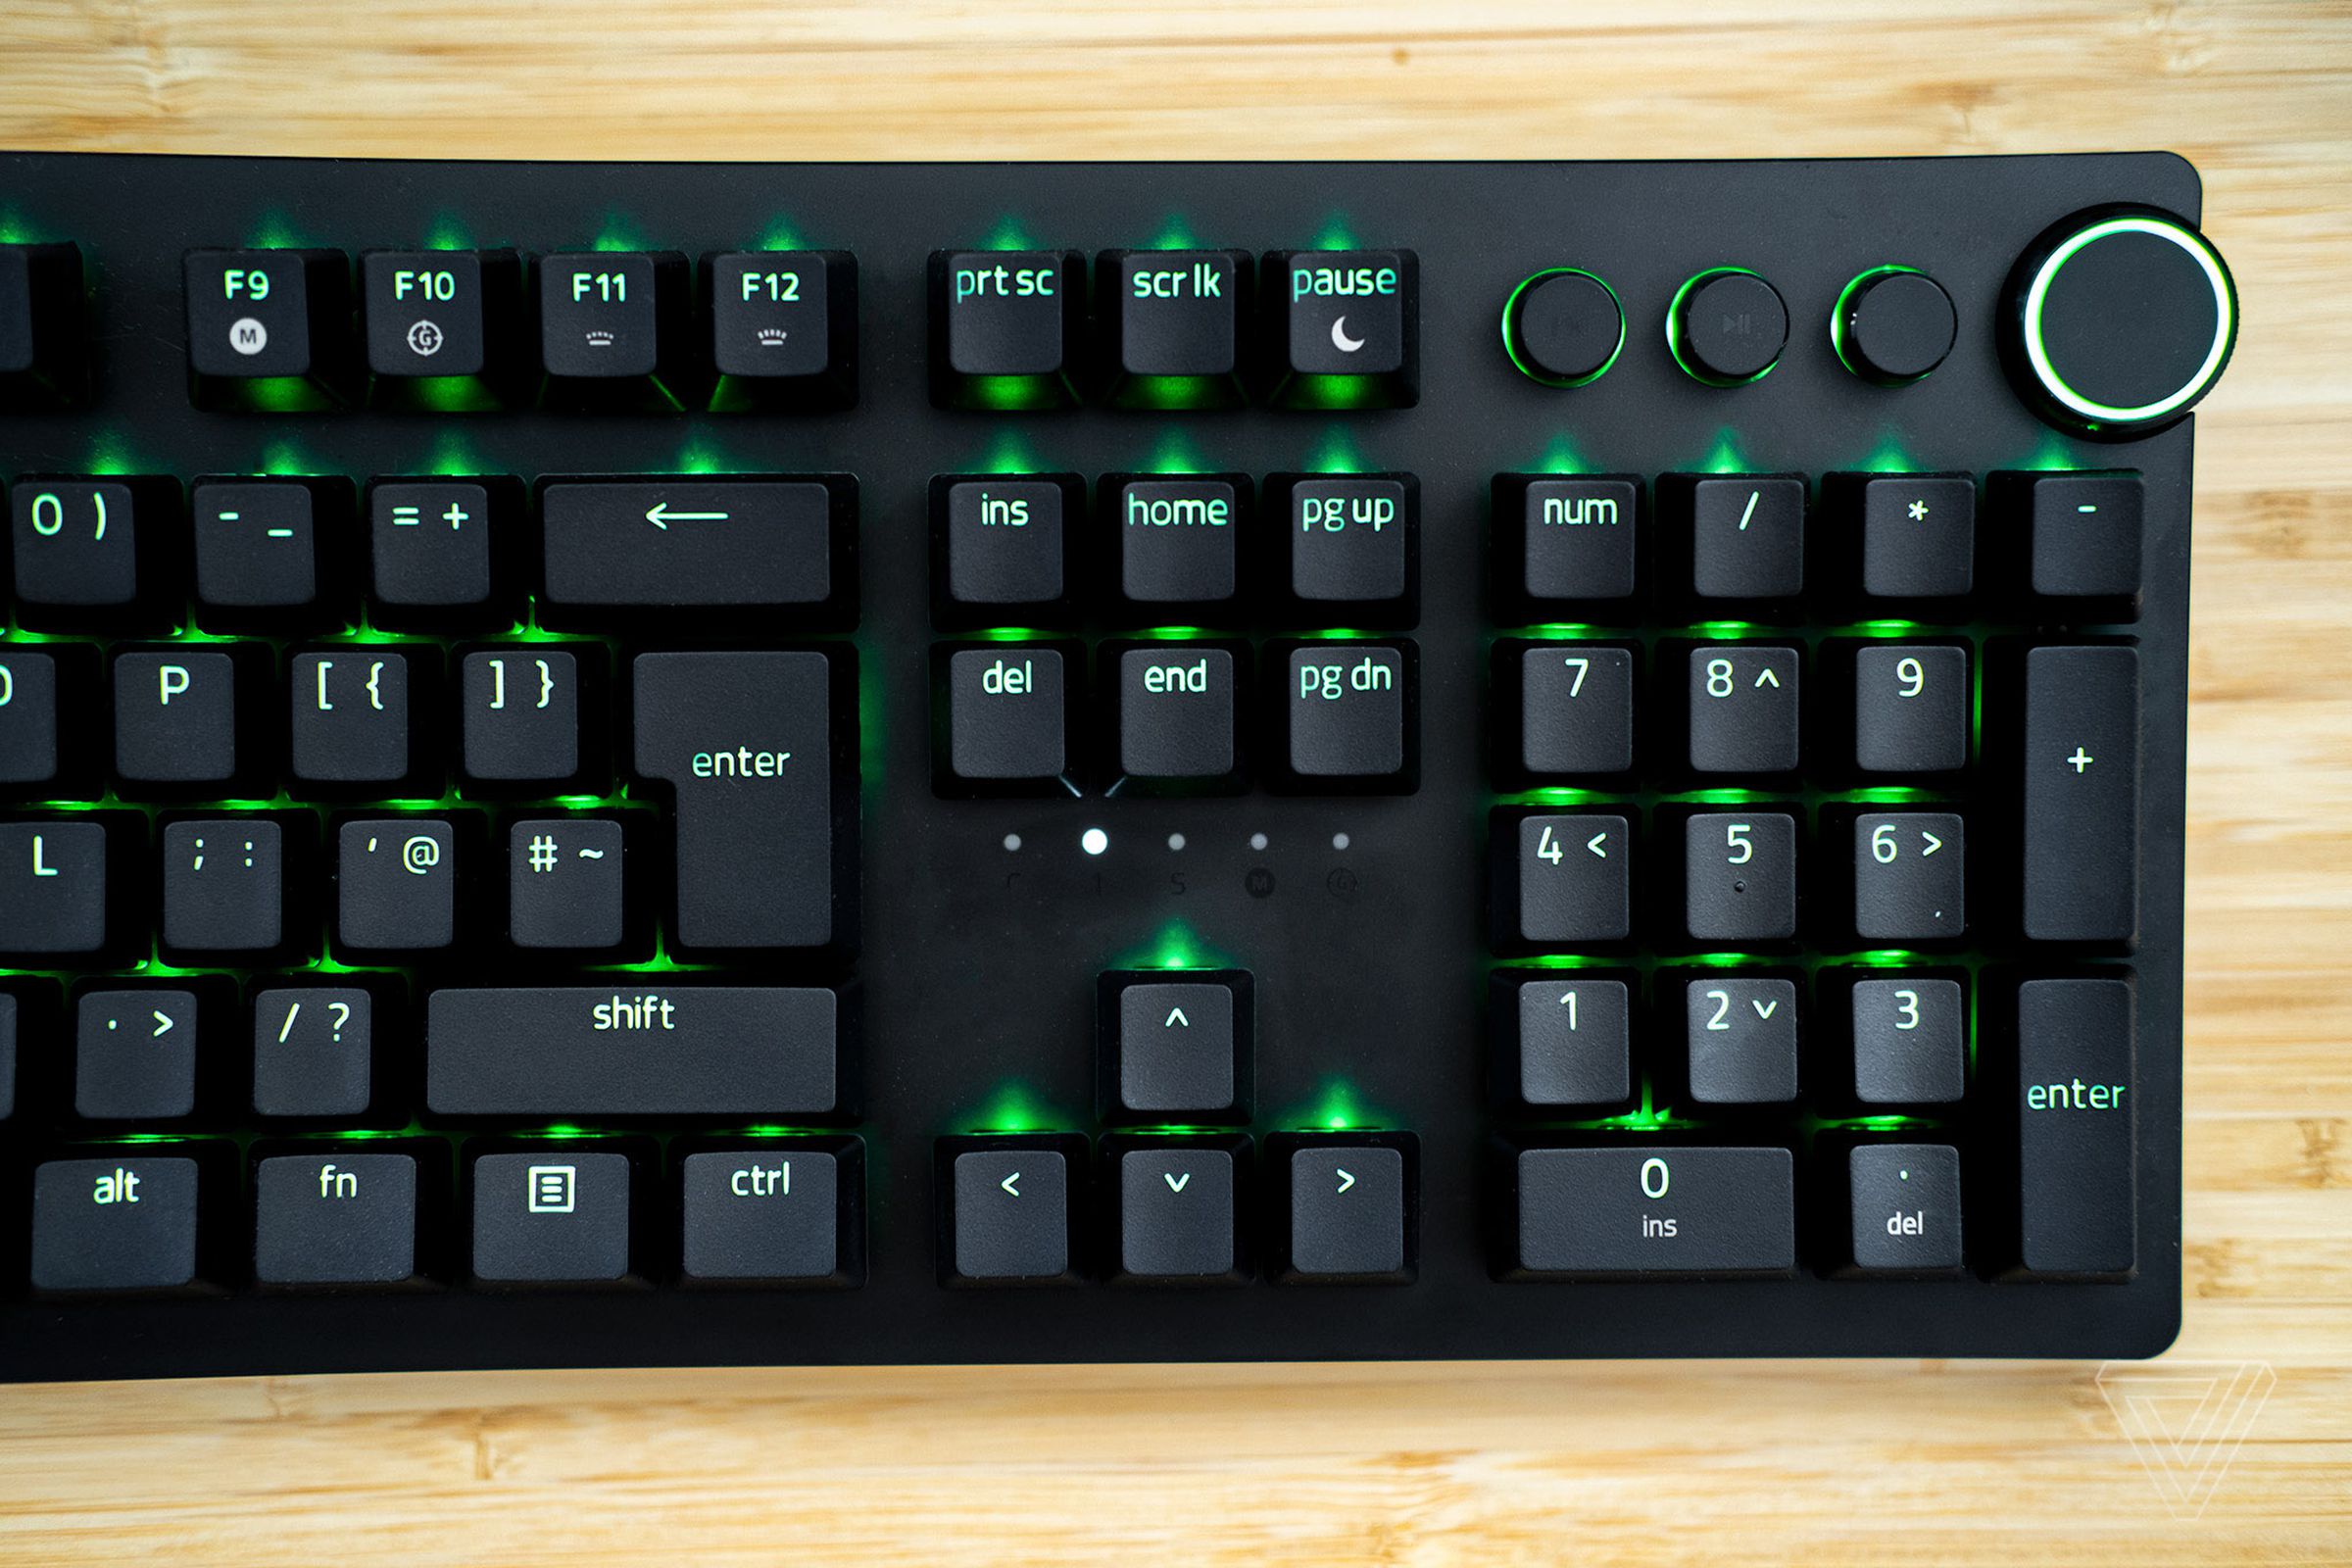 The mechanical keyboard might sell out faster than its light-based optical switches can read your keystrokes.